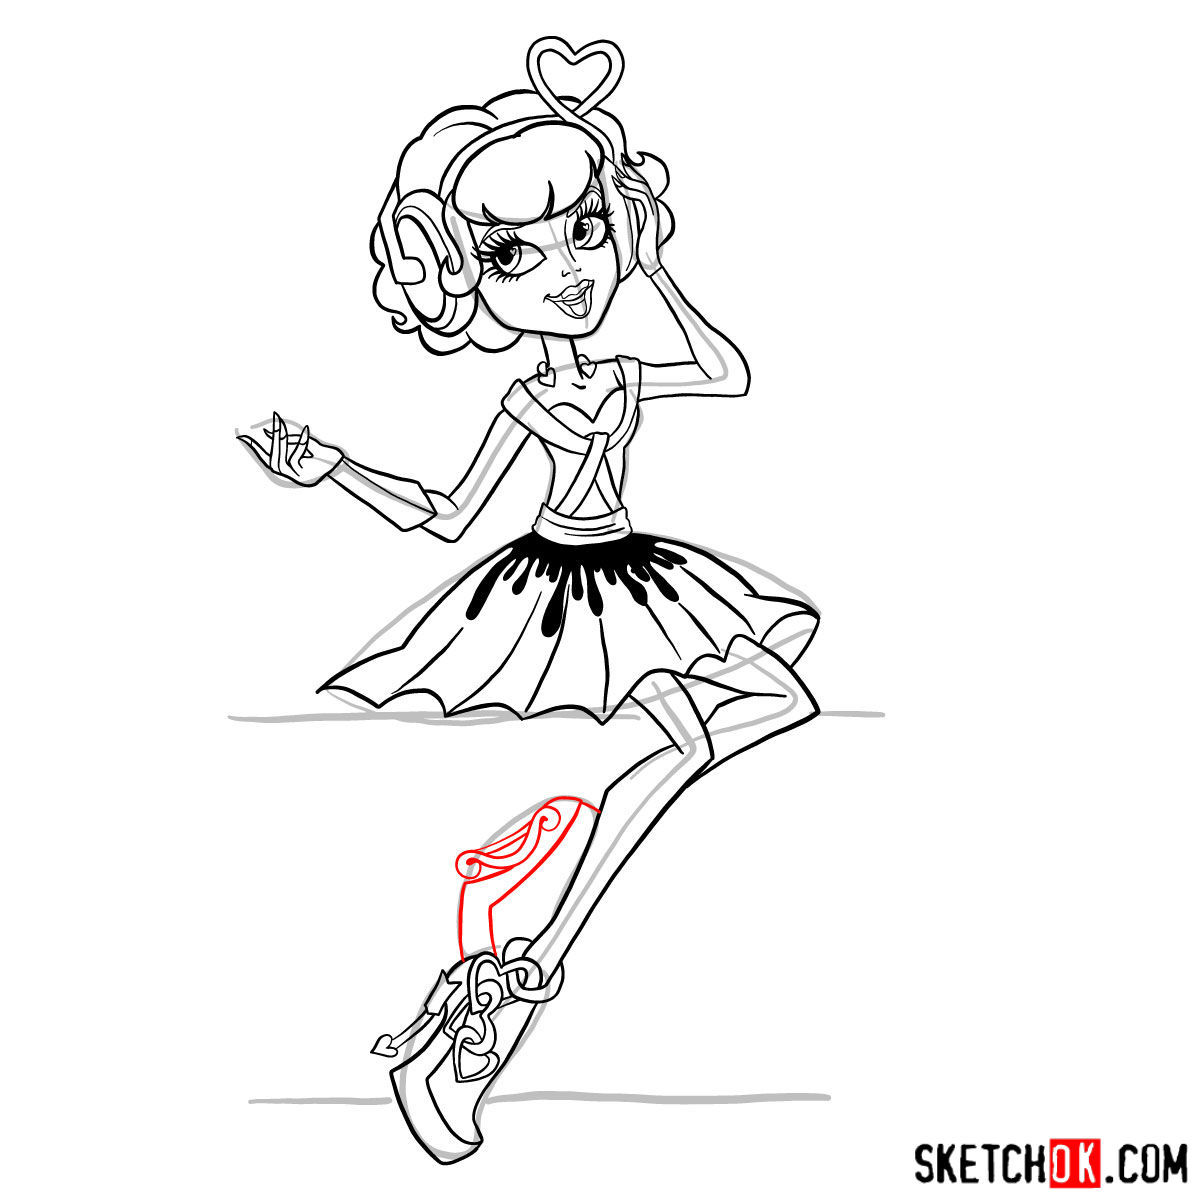 How to draw C.A. Cupid step by step - step 15